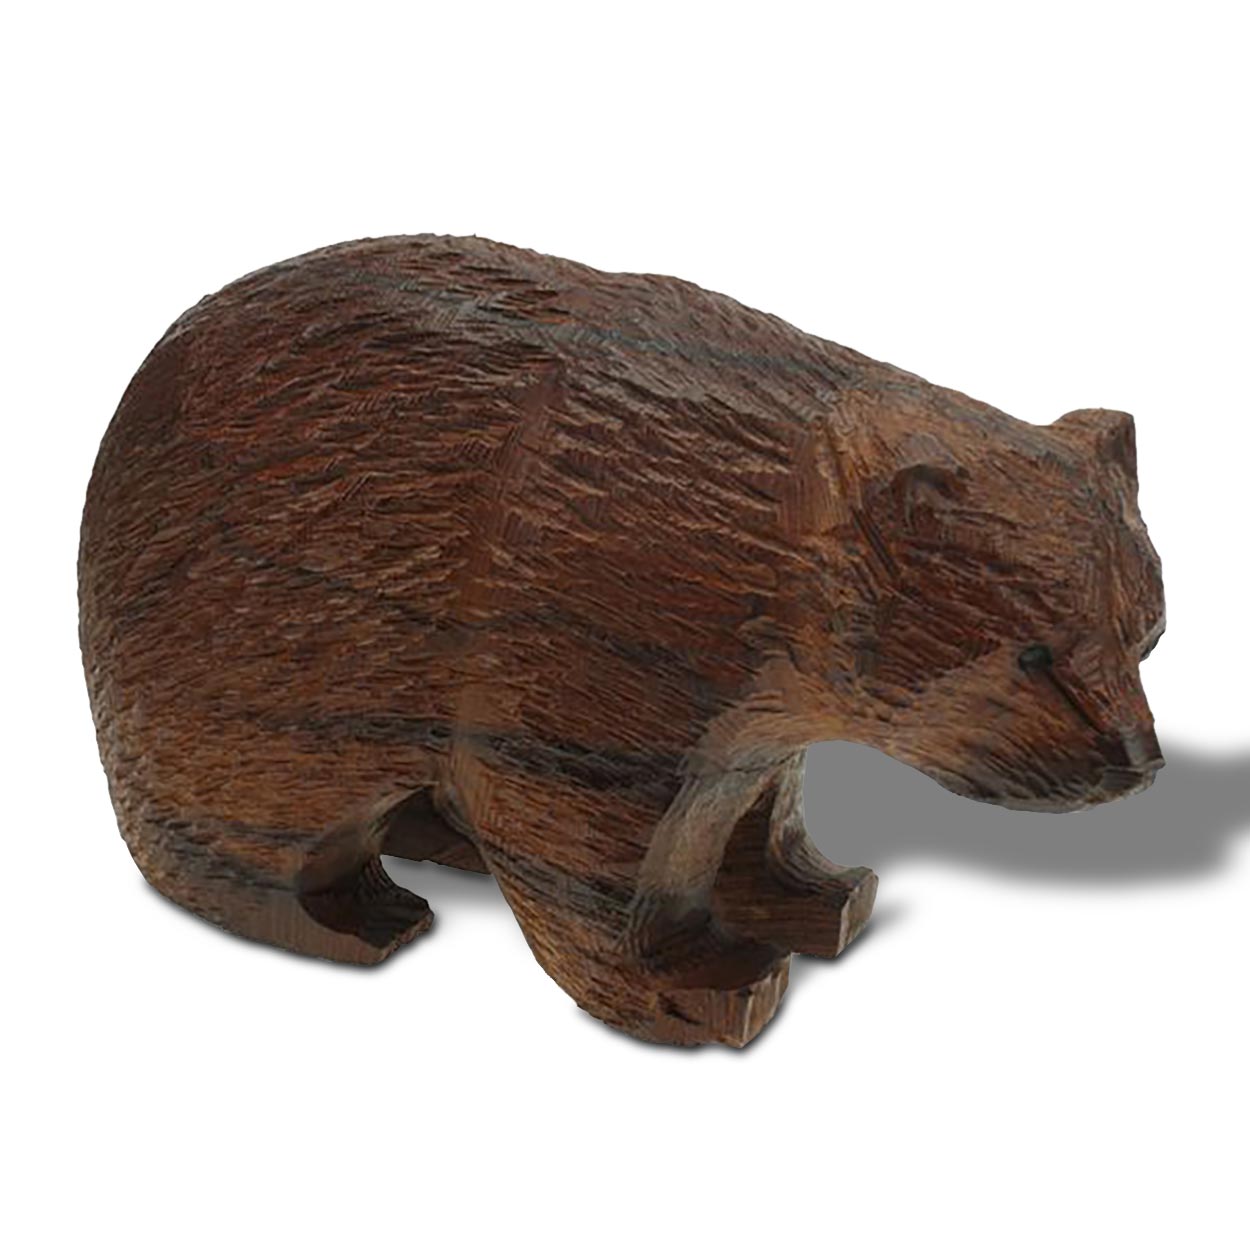 172345 - 12in Rough Bear Ironwood Carving - 1124